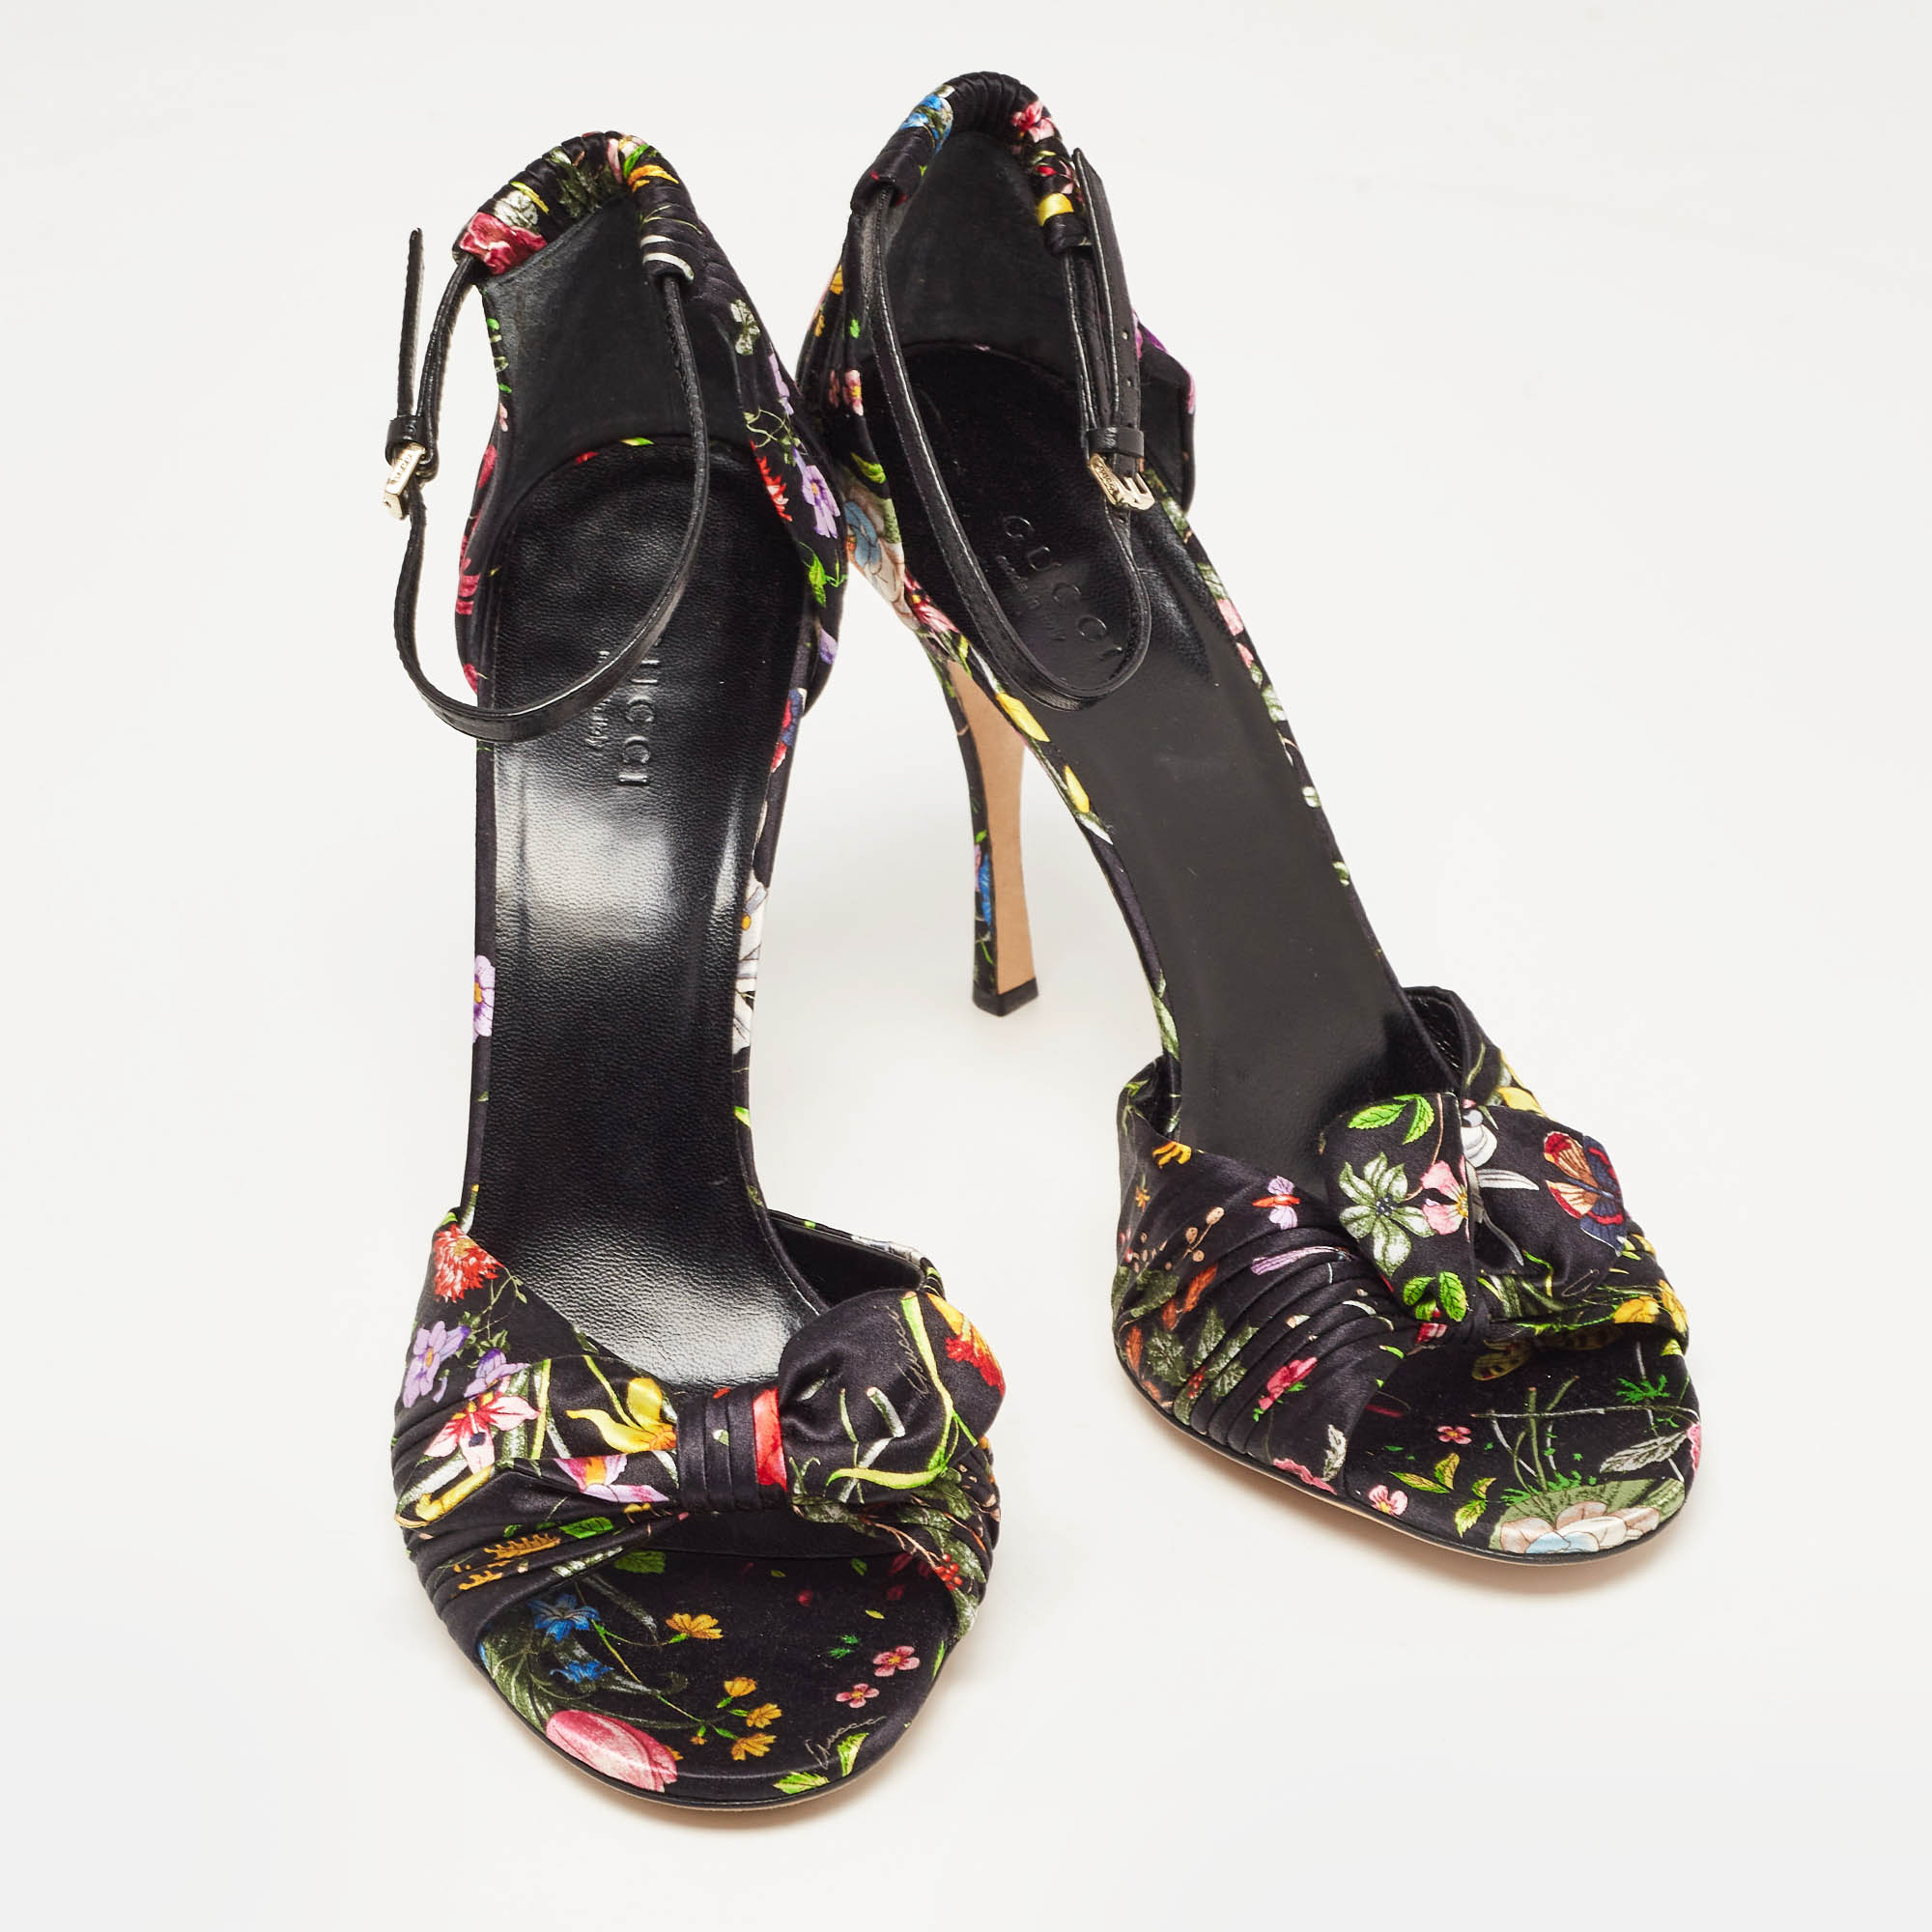 Gucci Black Floral Print Pleated Satin Bow Ankle Strap Sandals Size 39